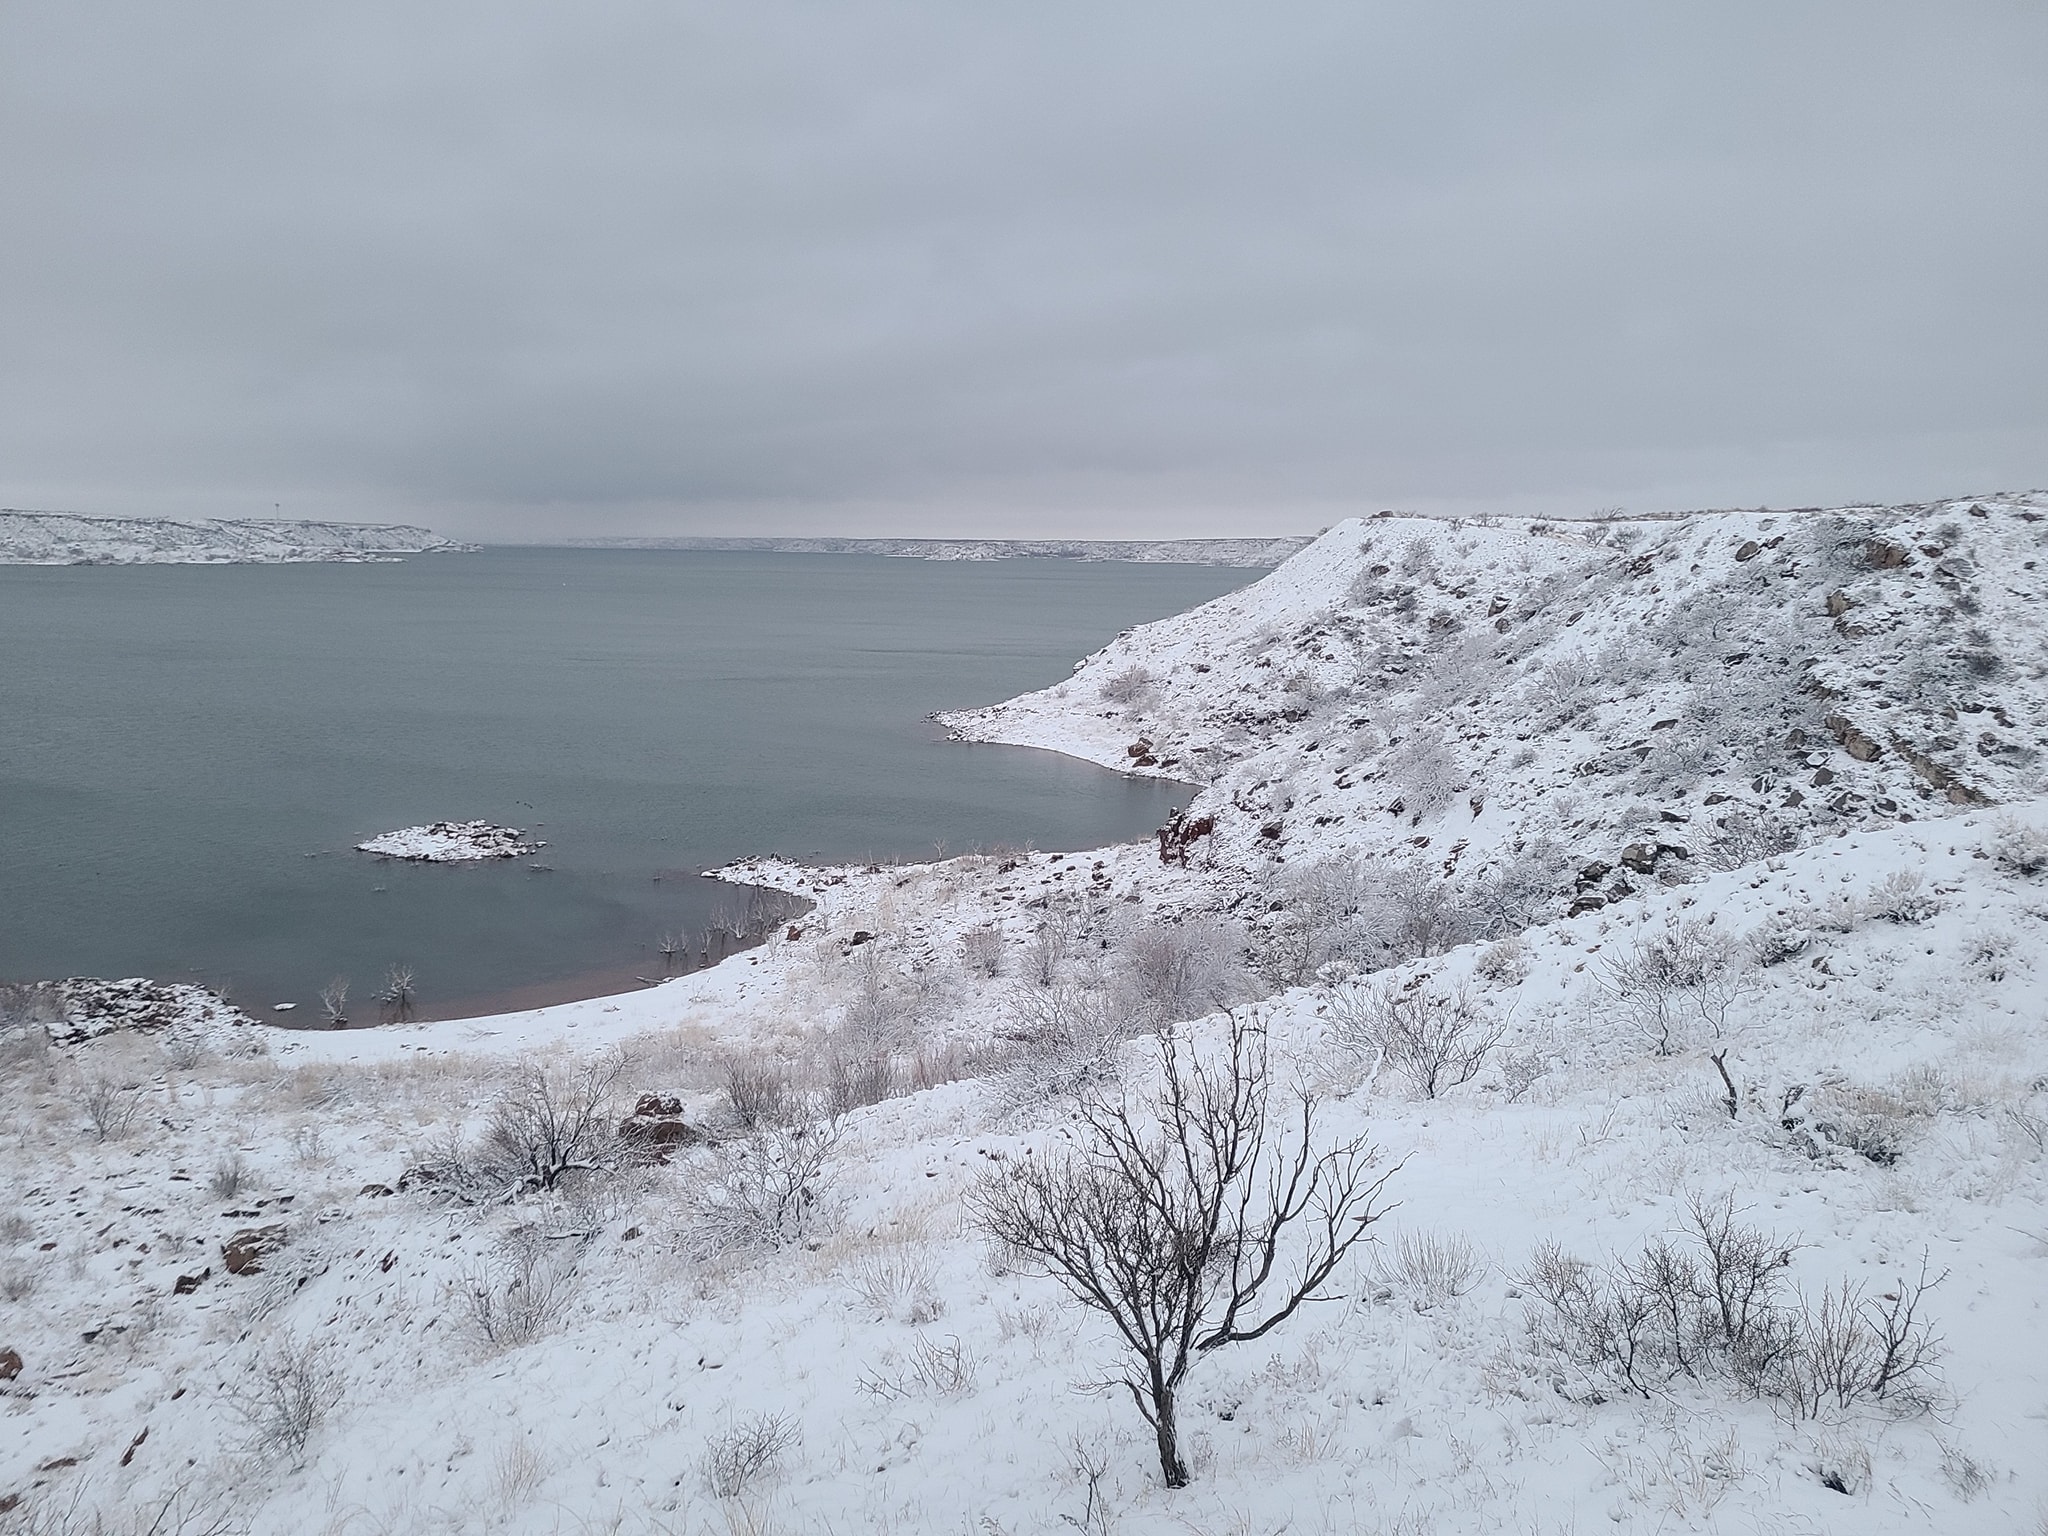 Photo of a snowy landscape around Lake Meredith on February 15th, 2023. Photo by Dawn Davis